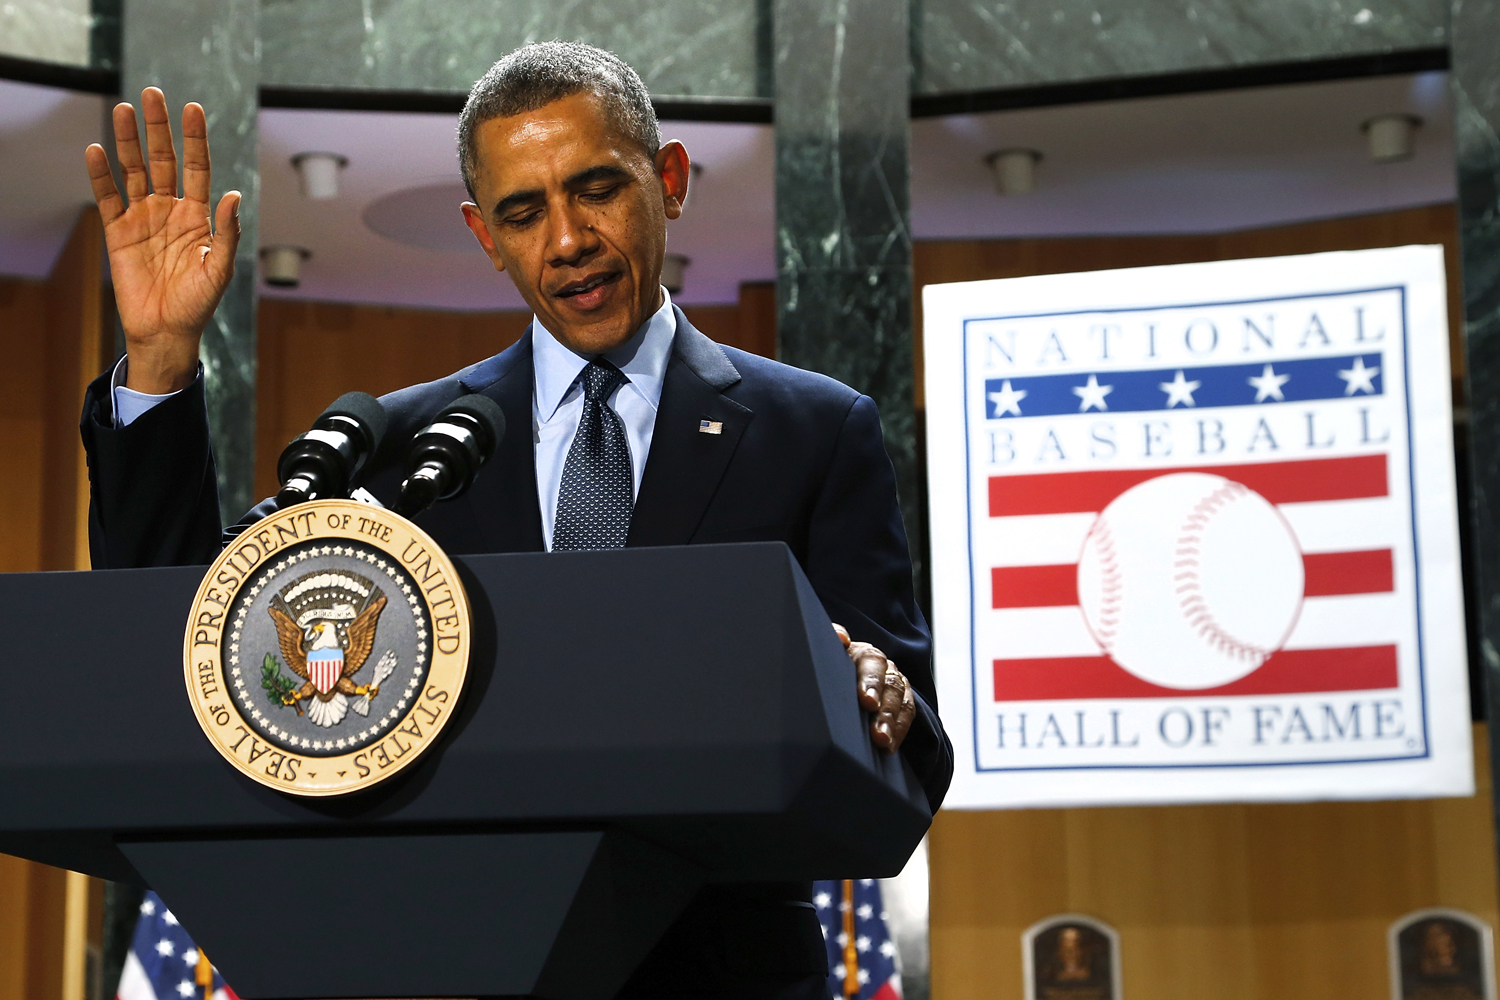 U.S. President Barack Obama delivers remarks at the National Baseball Hall of Fame in Cooperstown, New York, May 22, 2014. (Jonathan Ernst—Reuters)